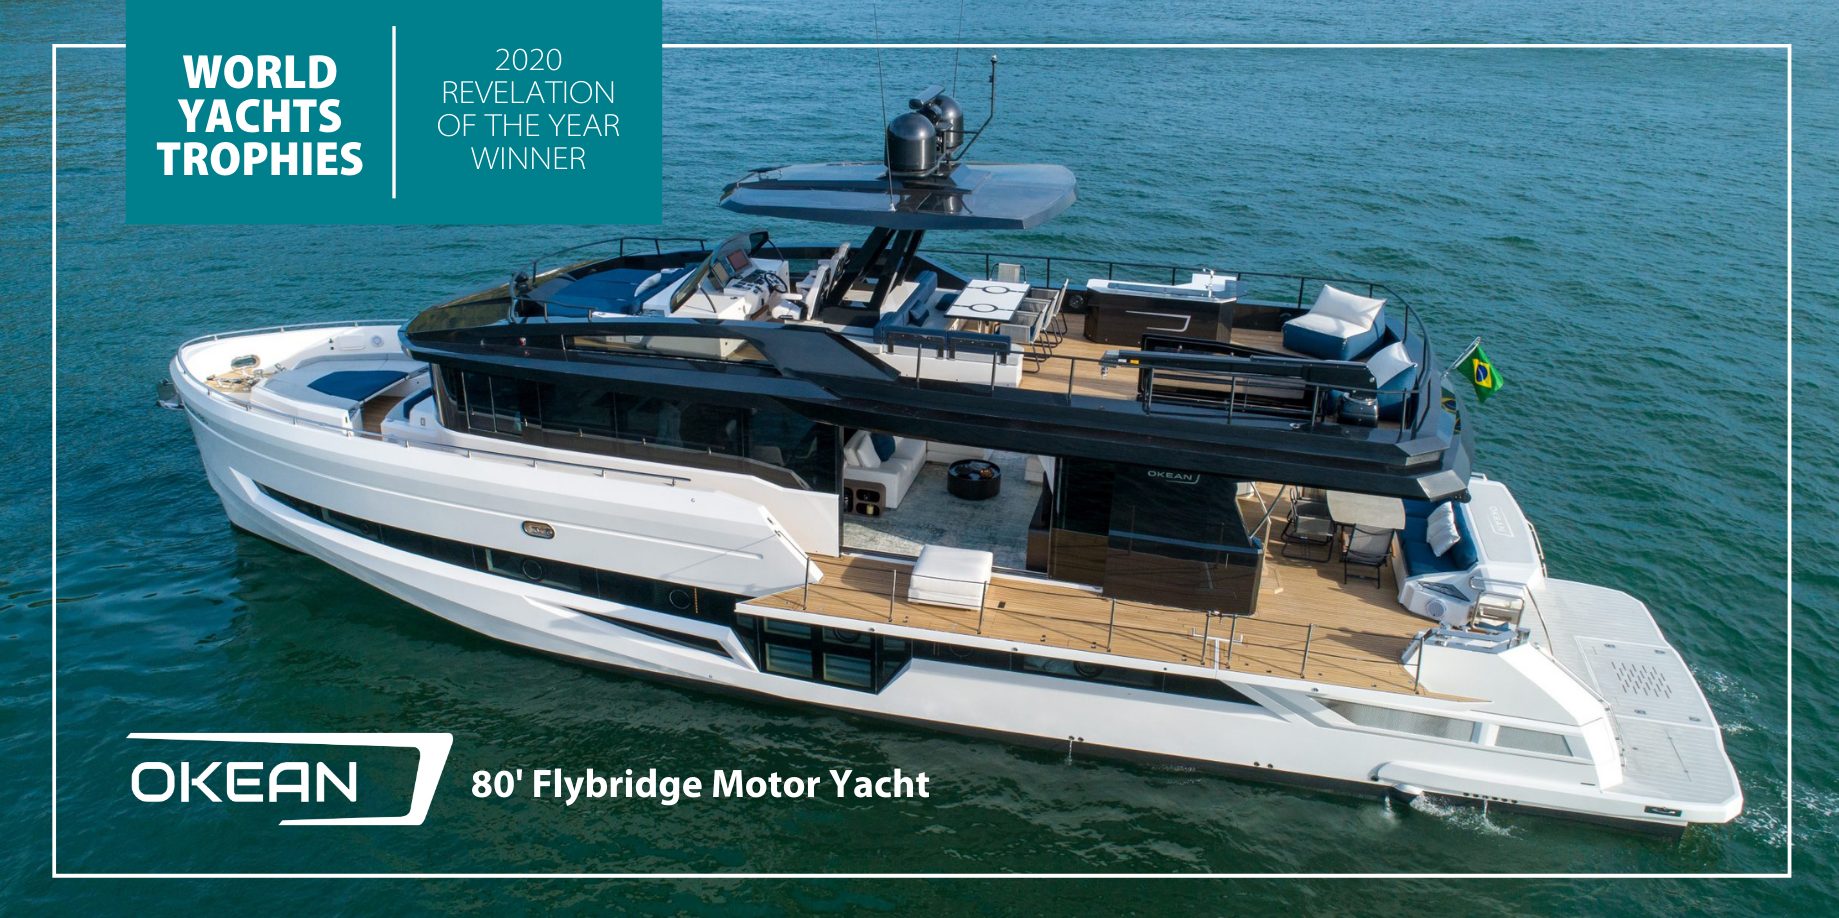 The OKEAN 80’ Flybridge Motor Yacht Takes Home the Revelation of the Year Award at the 2020 World Yachts Trophies in Cannes